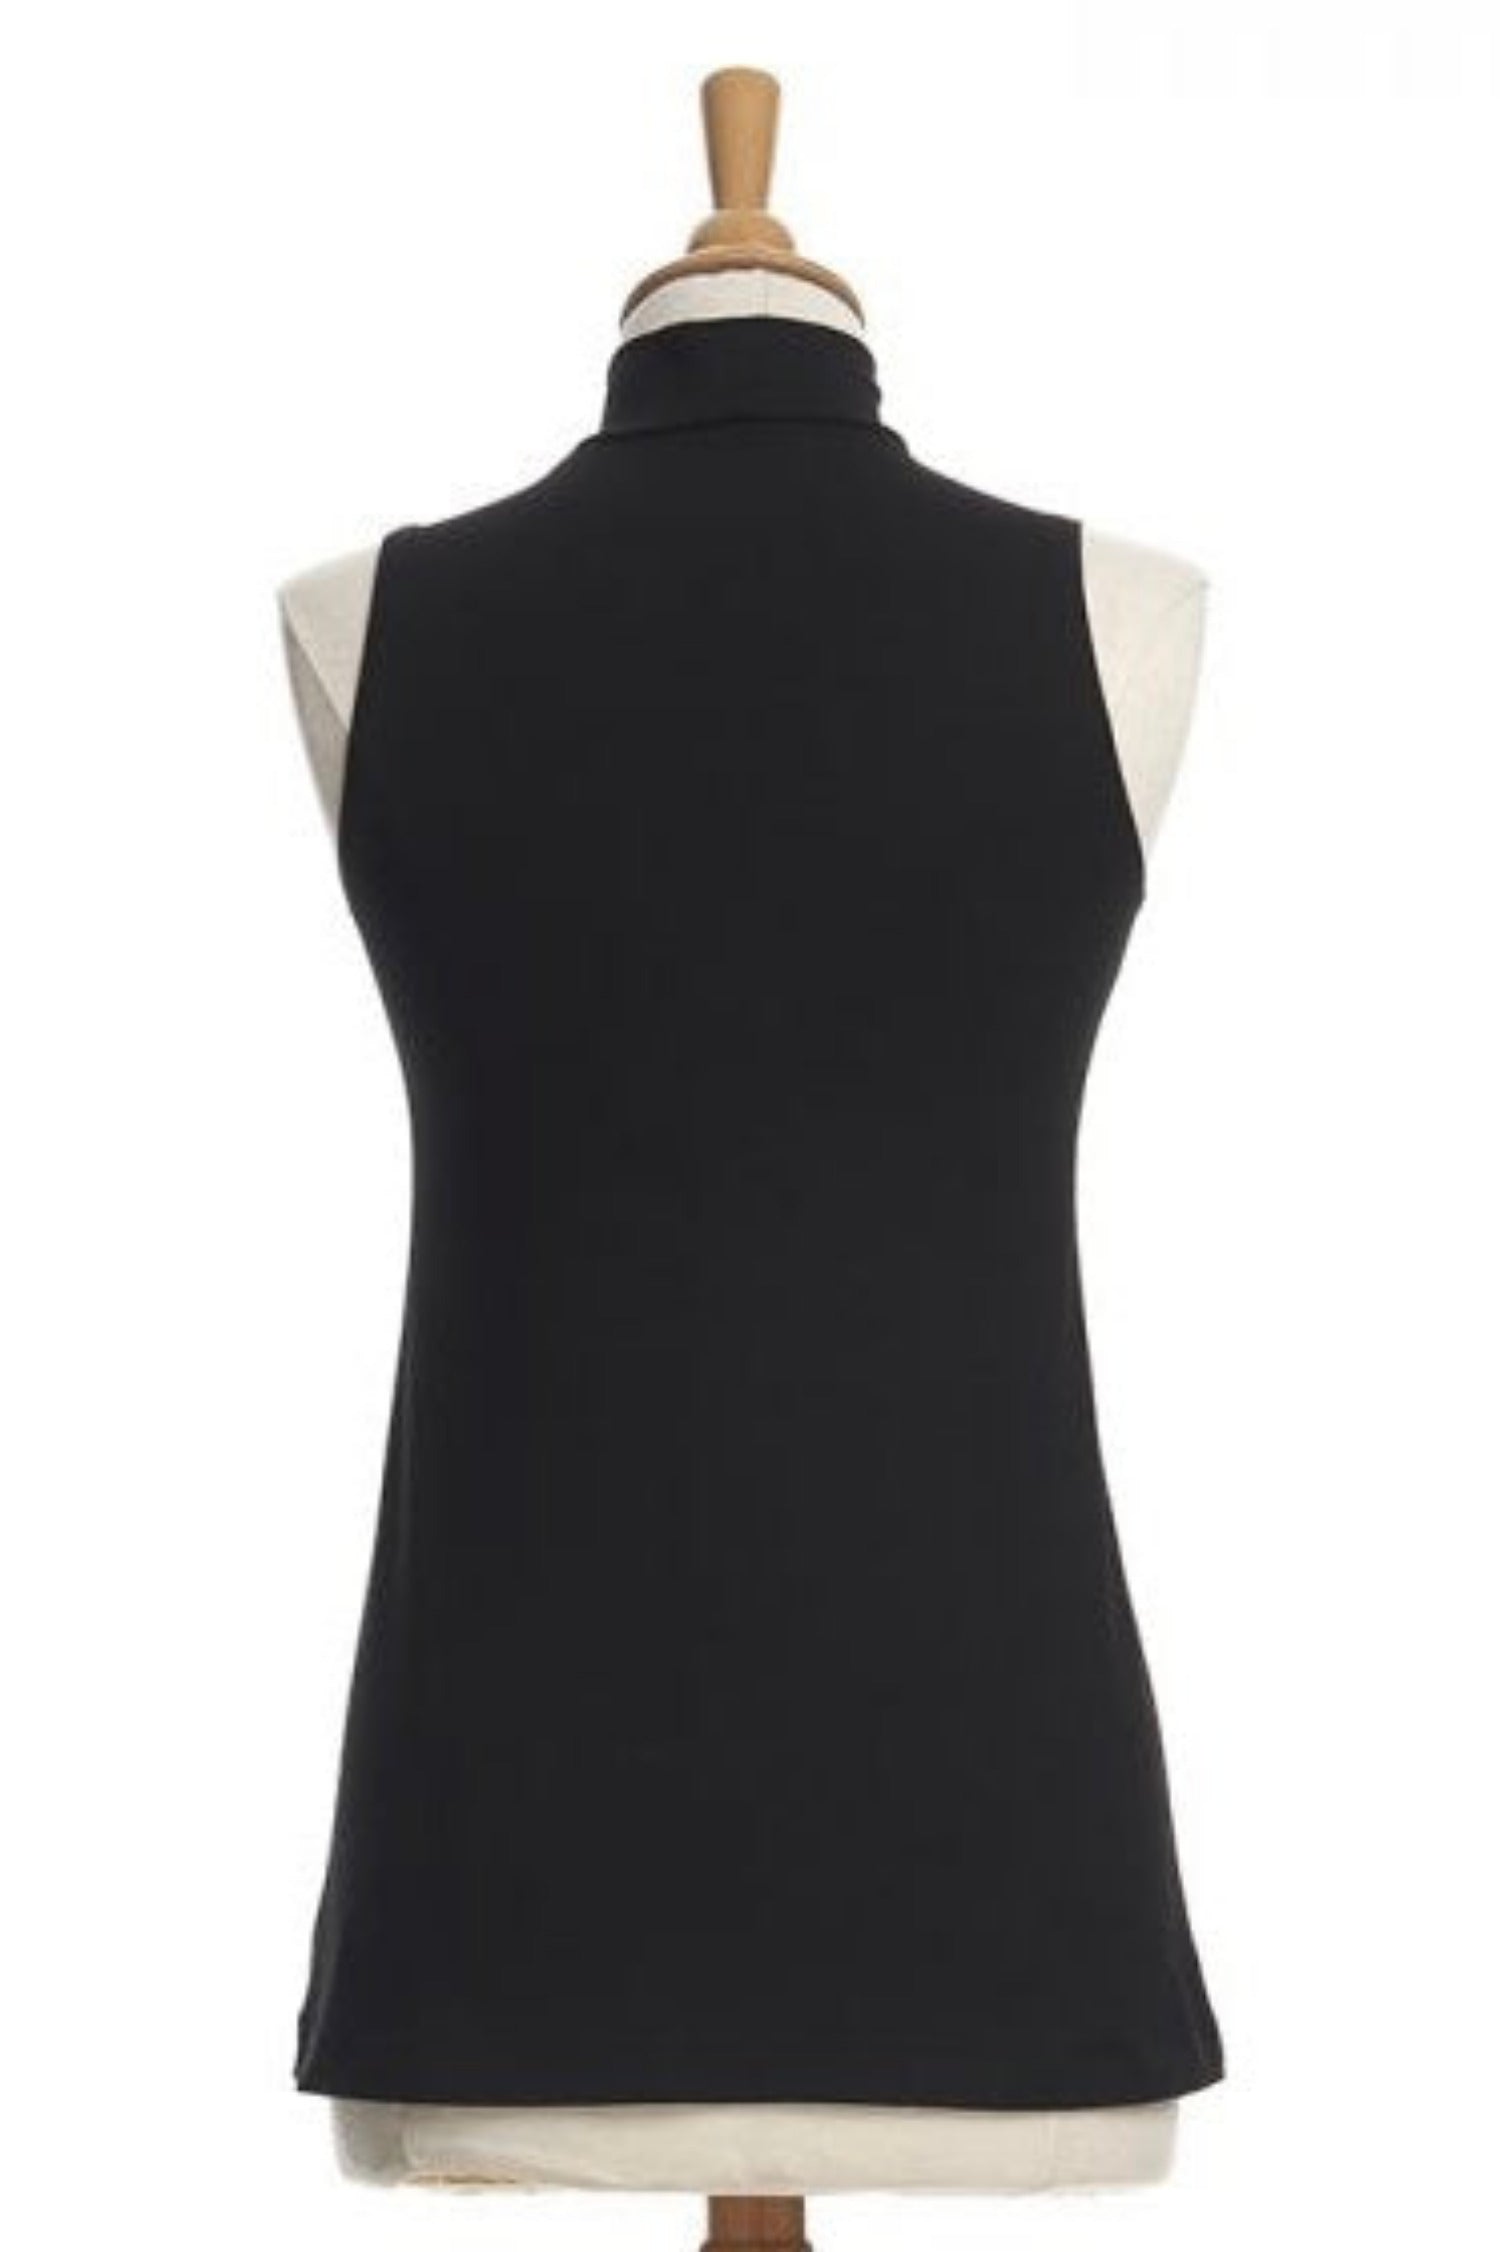 Saturne Top by Rien ne se Perd, back view, Black, mock turtleneck, sleeveless, long, sizes XS to XXL, made in Quebec